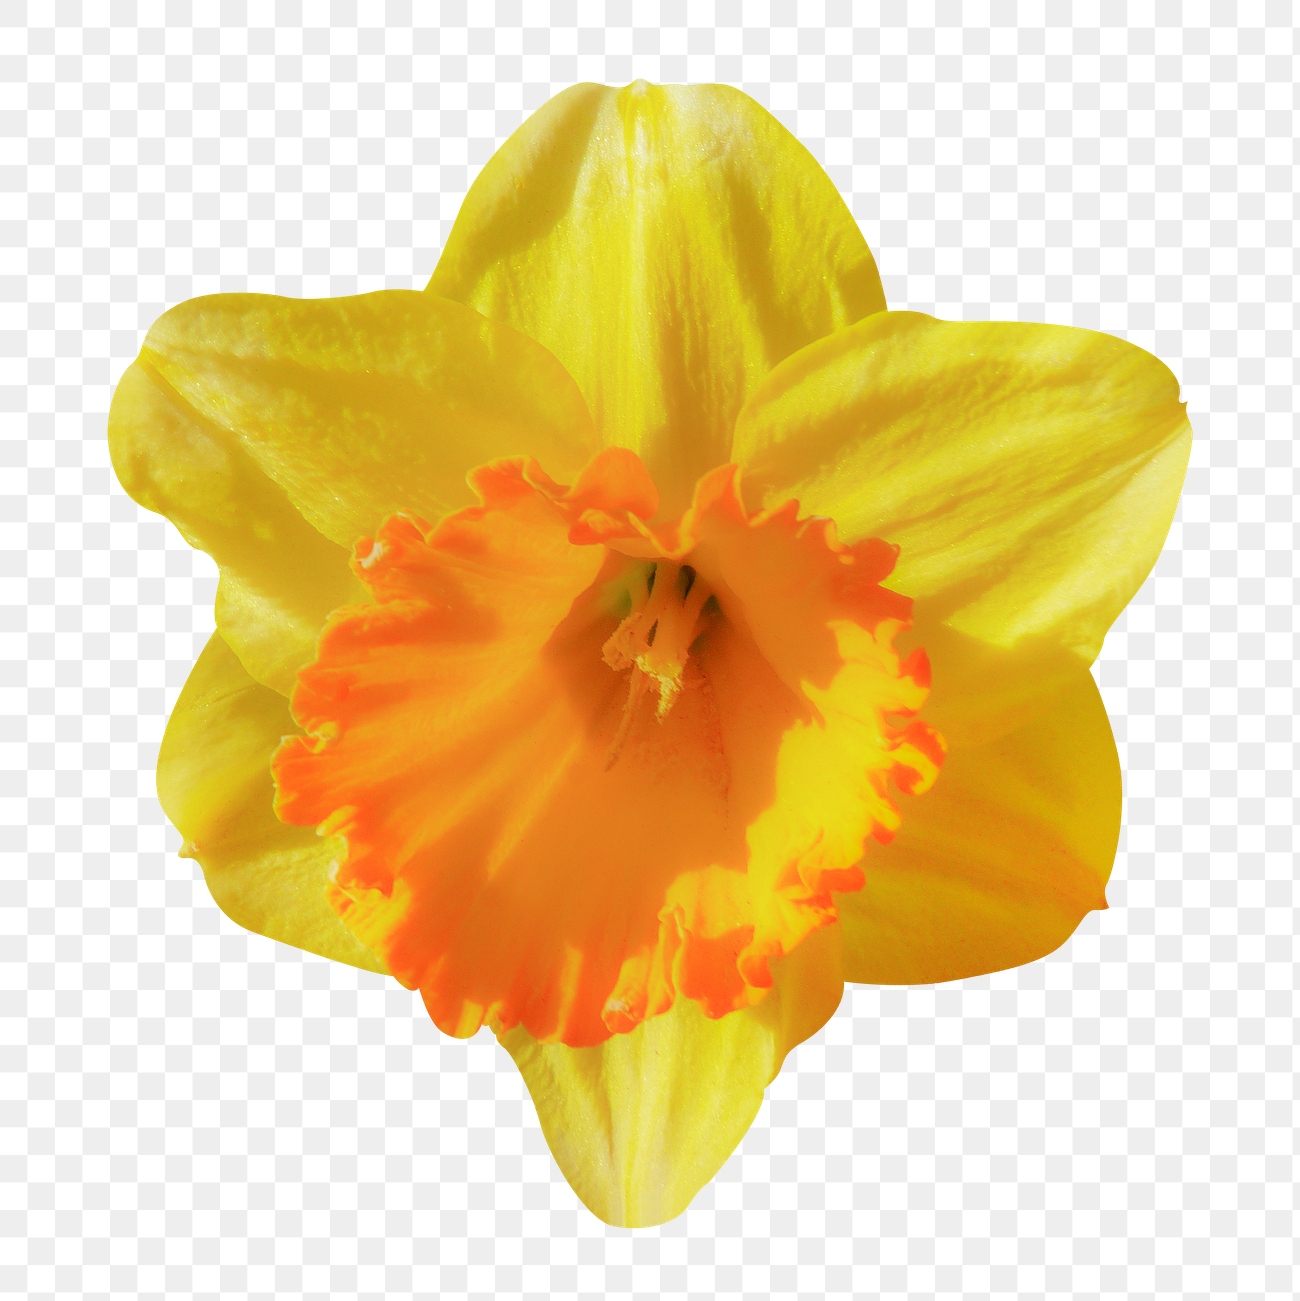 Daffodil png, yellow flower clipart, | Premium PNG - rawpixel